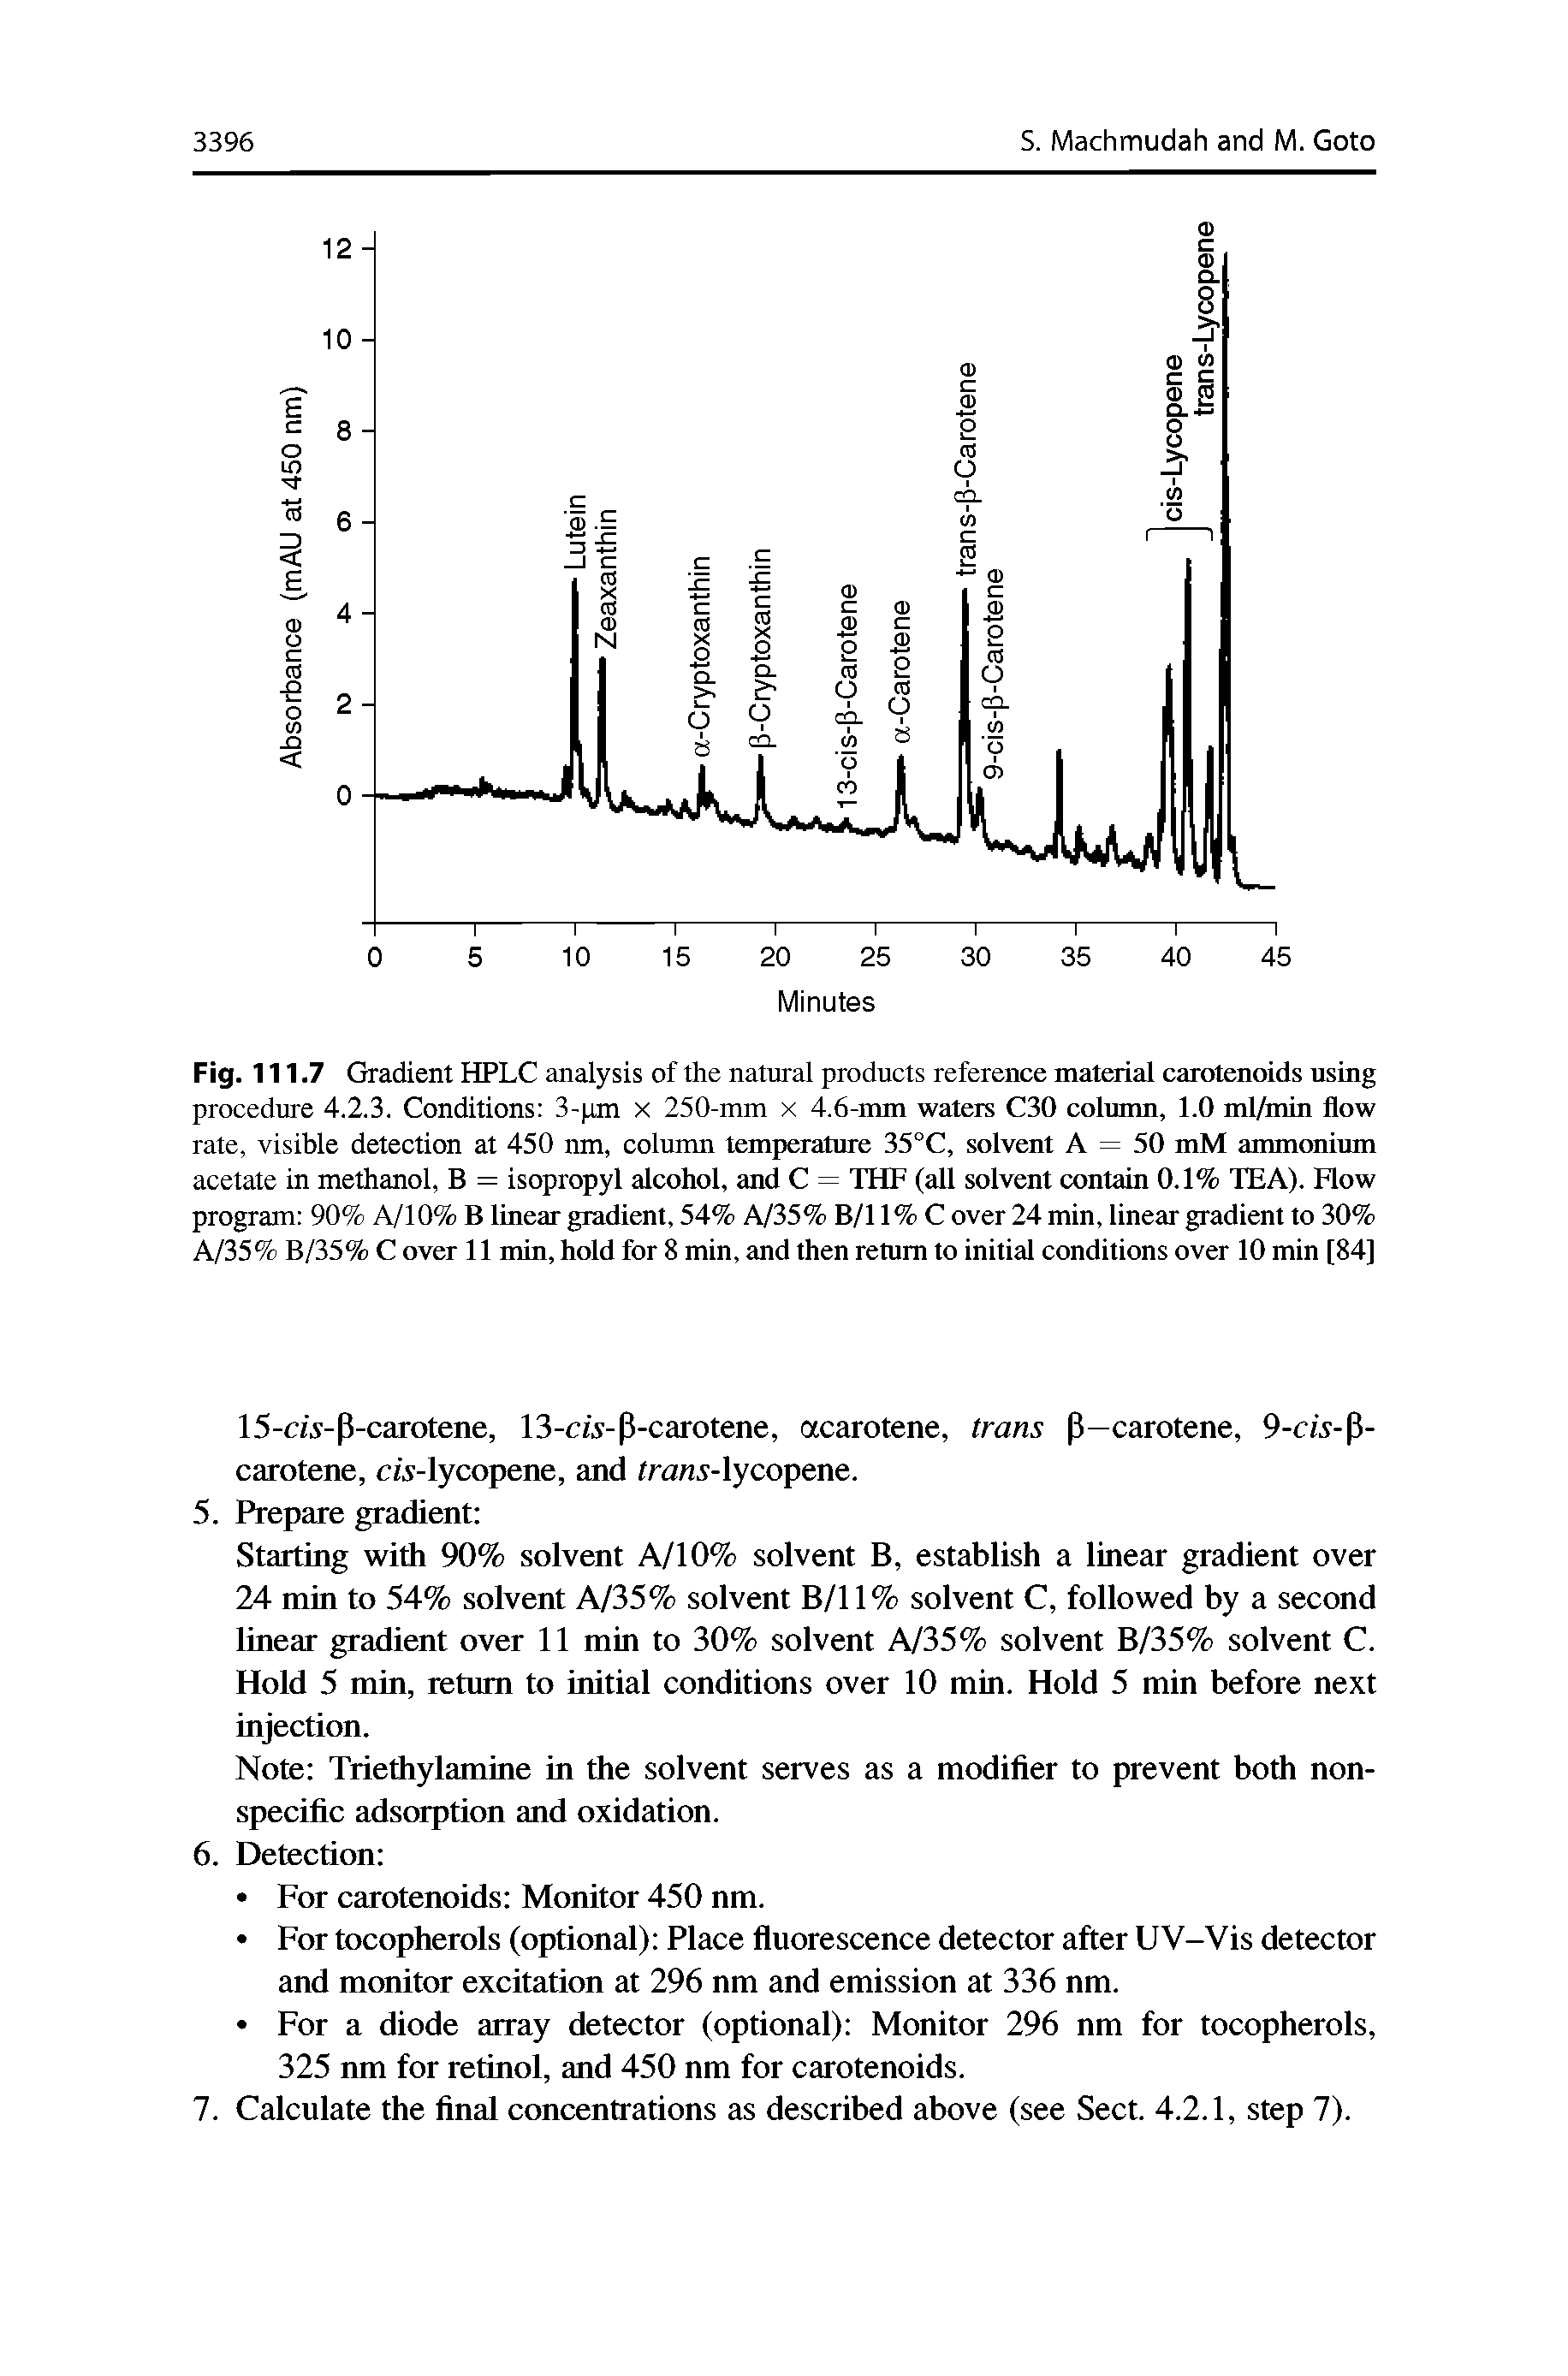 Fig. 111.7 Gradient HPLC analysis of the natural products reference matruial carotenoids using procedure 4.2.3. Conditions 3- jm x 250-nun x 4.6-mm waters C30 column, 1.0 ml/min flow rate, visible detection at 450 mn, column temperature 35°C, solvent A = 50 mM ammmiium acetate in methanol, B = isopropyl alcohol, and C = THF (all solvent contain 0.1% TEA). Flow program 90% A/10% B linear gradient, 54% A/35% B/11% Cover 24 min, linear gradient to 30% A/35% B/35% C over 11 min, hold for 8 min, and then return to initial conditions over 10 min [84]...